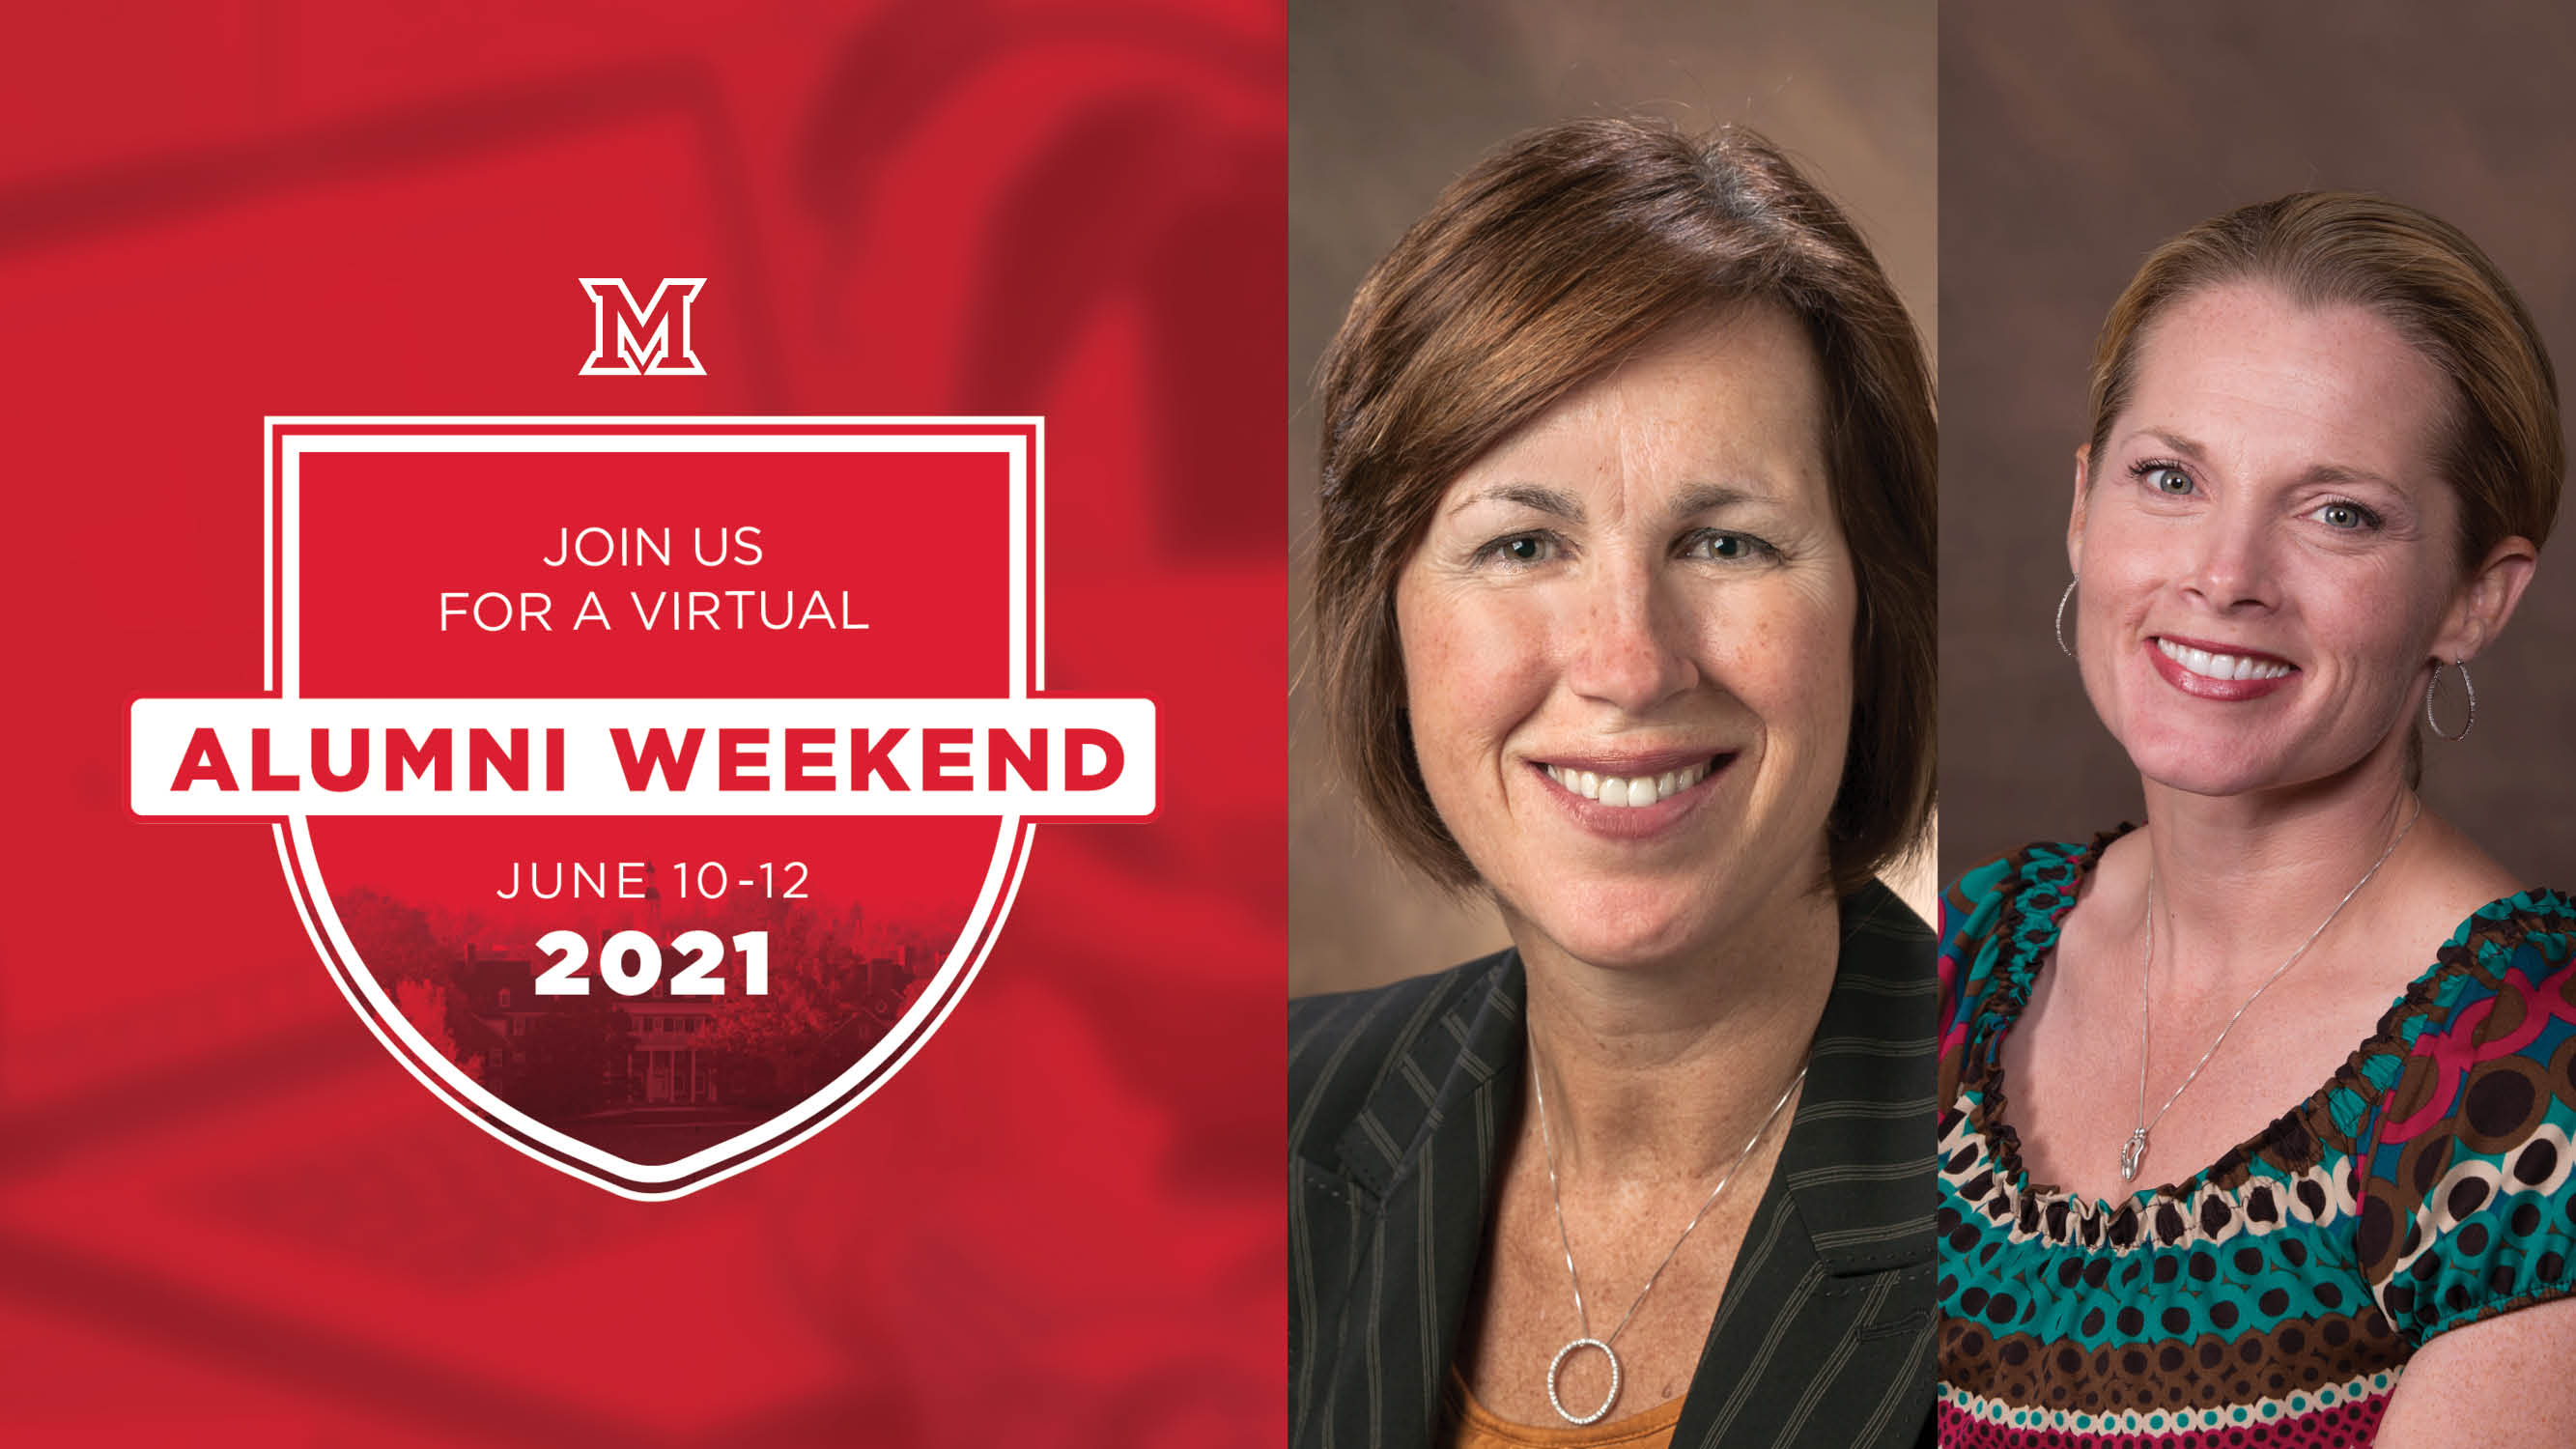 Image for Miami Presents Alumni Weekend: Exploring Cognitive Diversity and Whole-brain Thinking with Dr. Gillian Oakenfull and Prof. Cynthia Oakenfull webinar